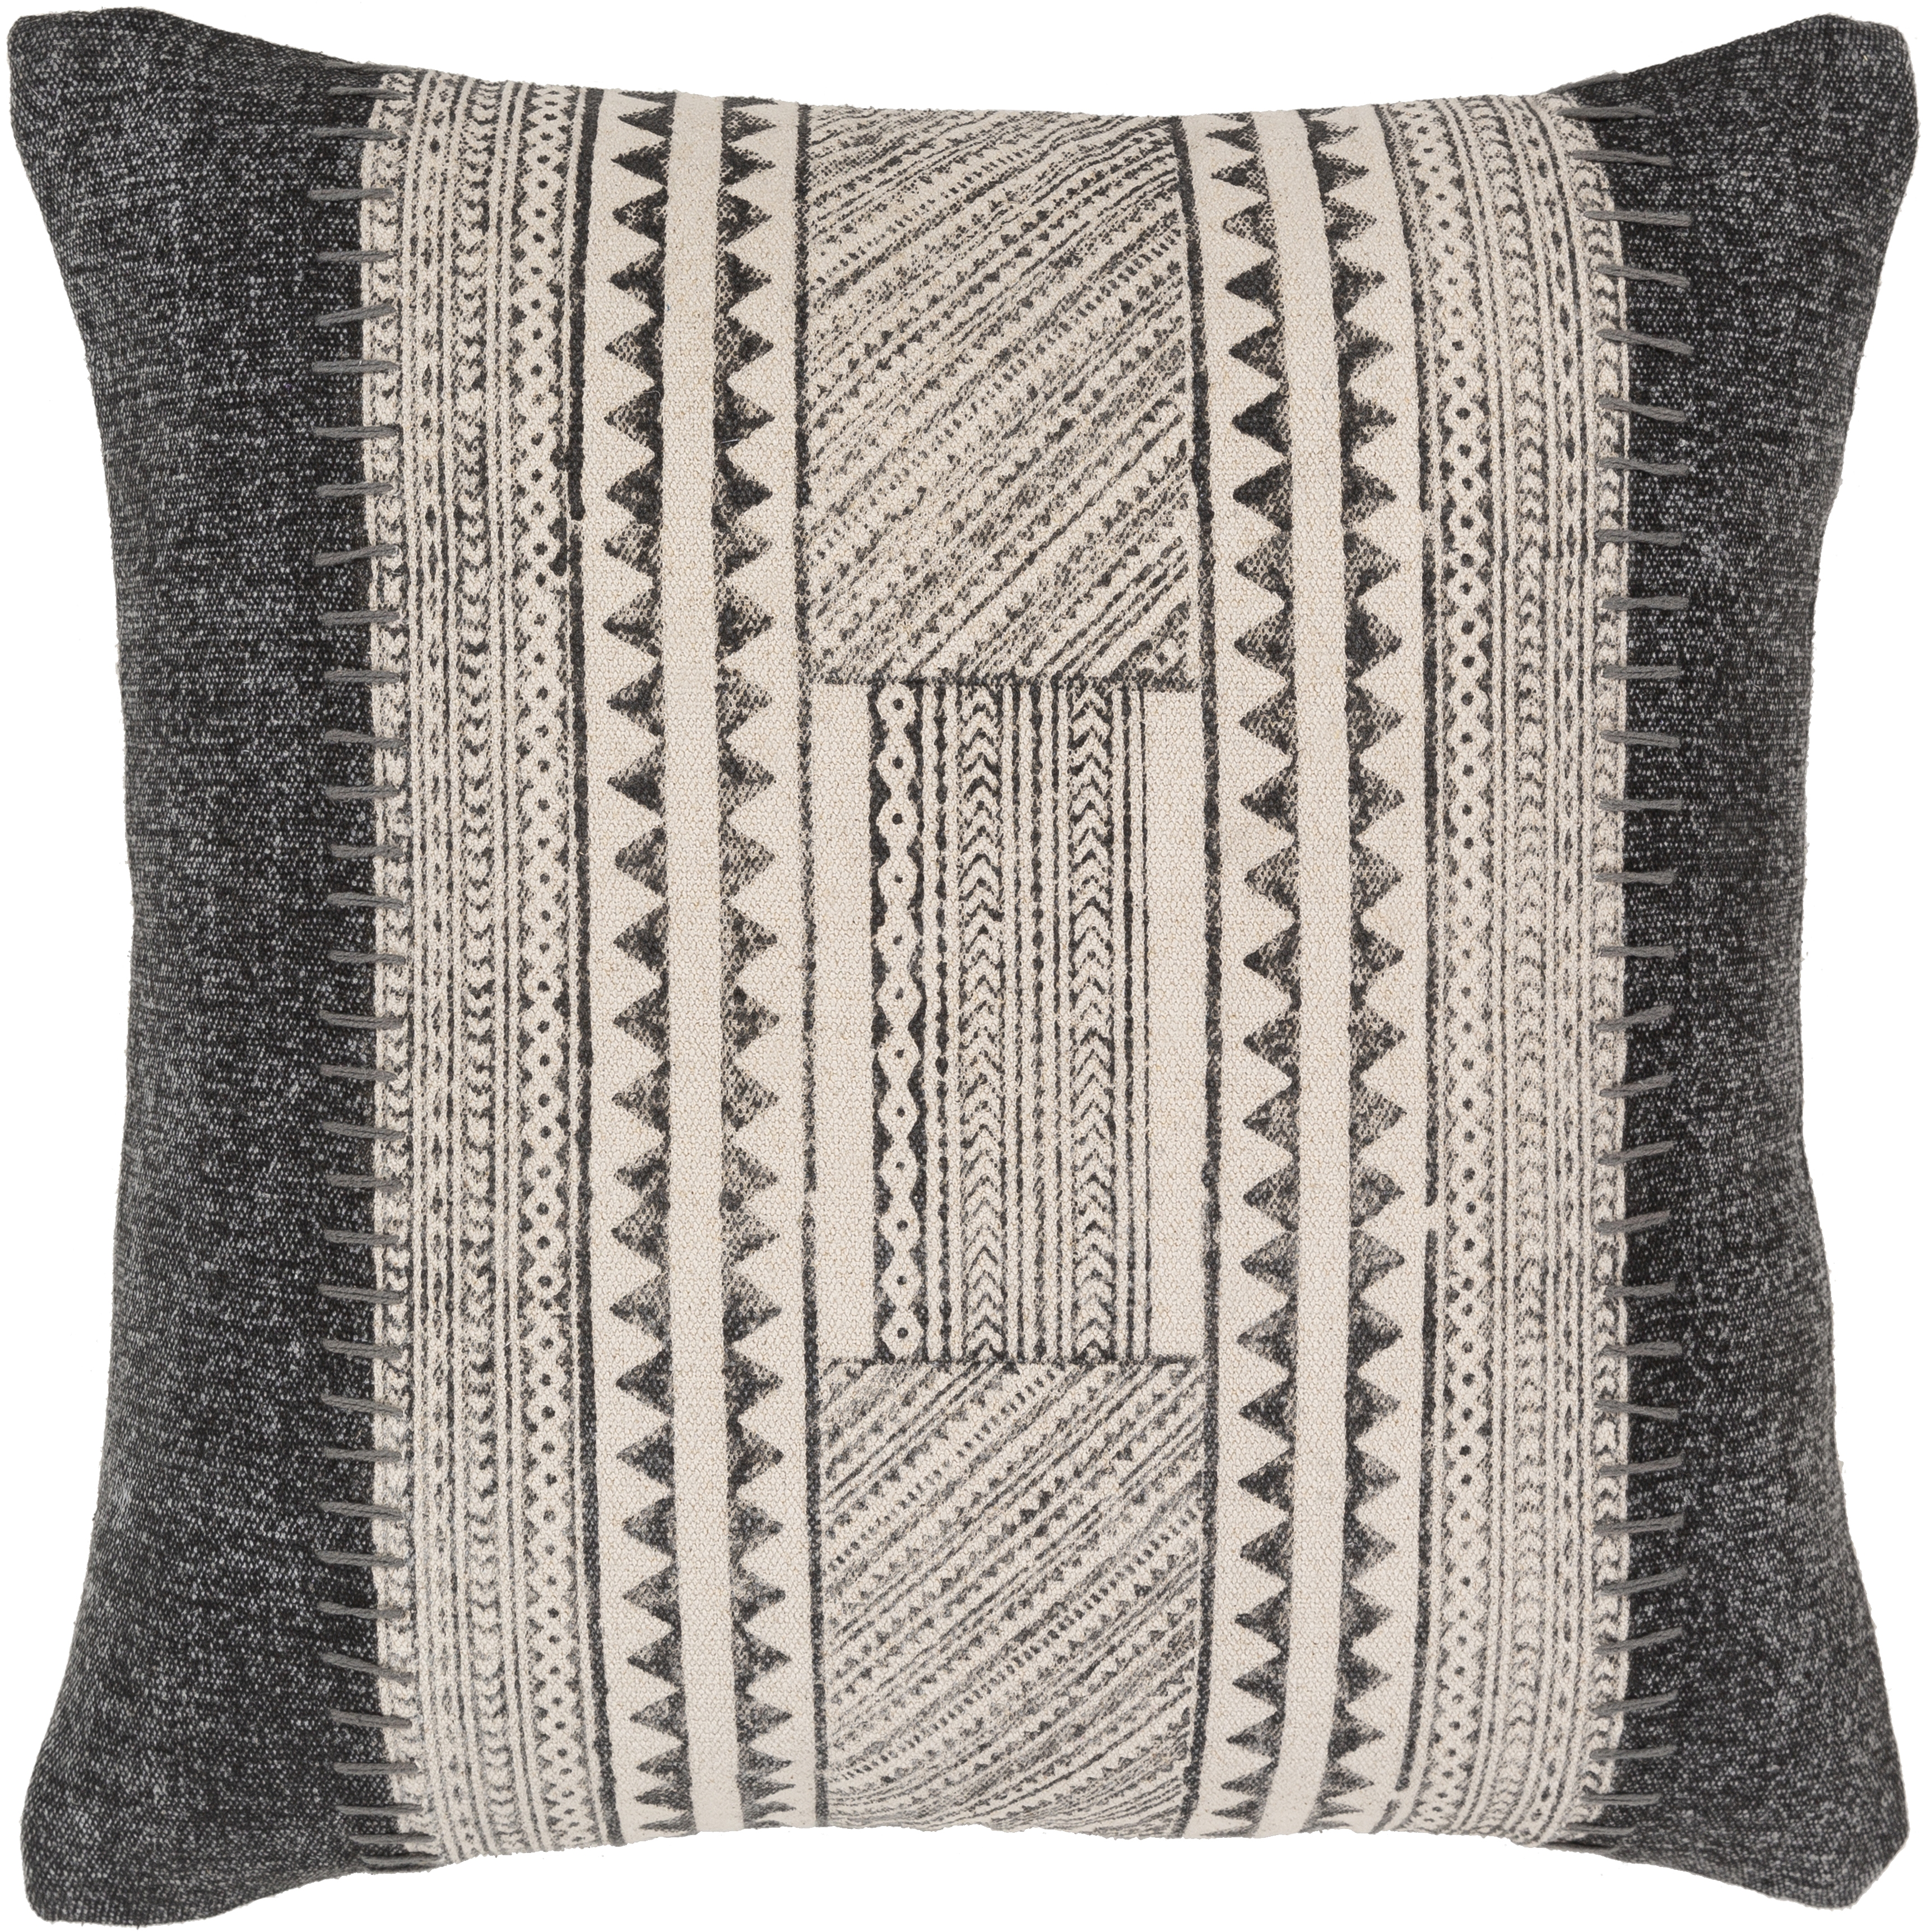 Lola Throw Pillow, 20" x 20", pillow cover only - Image 0